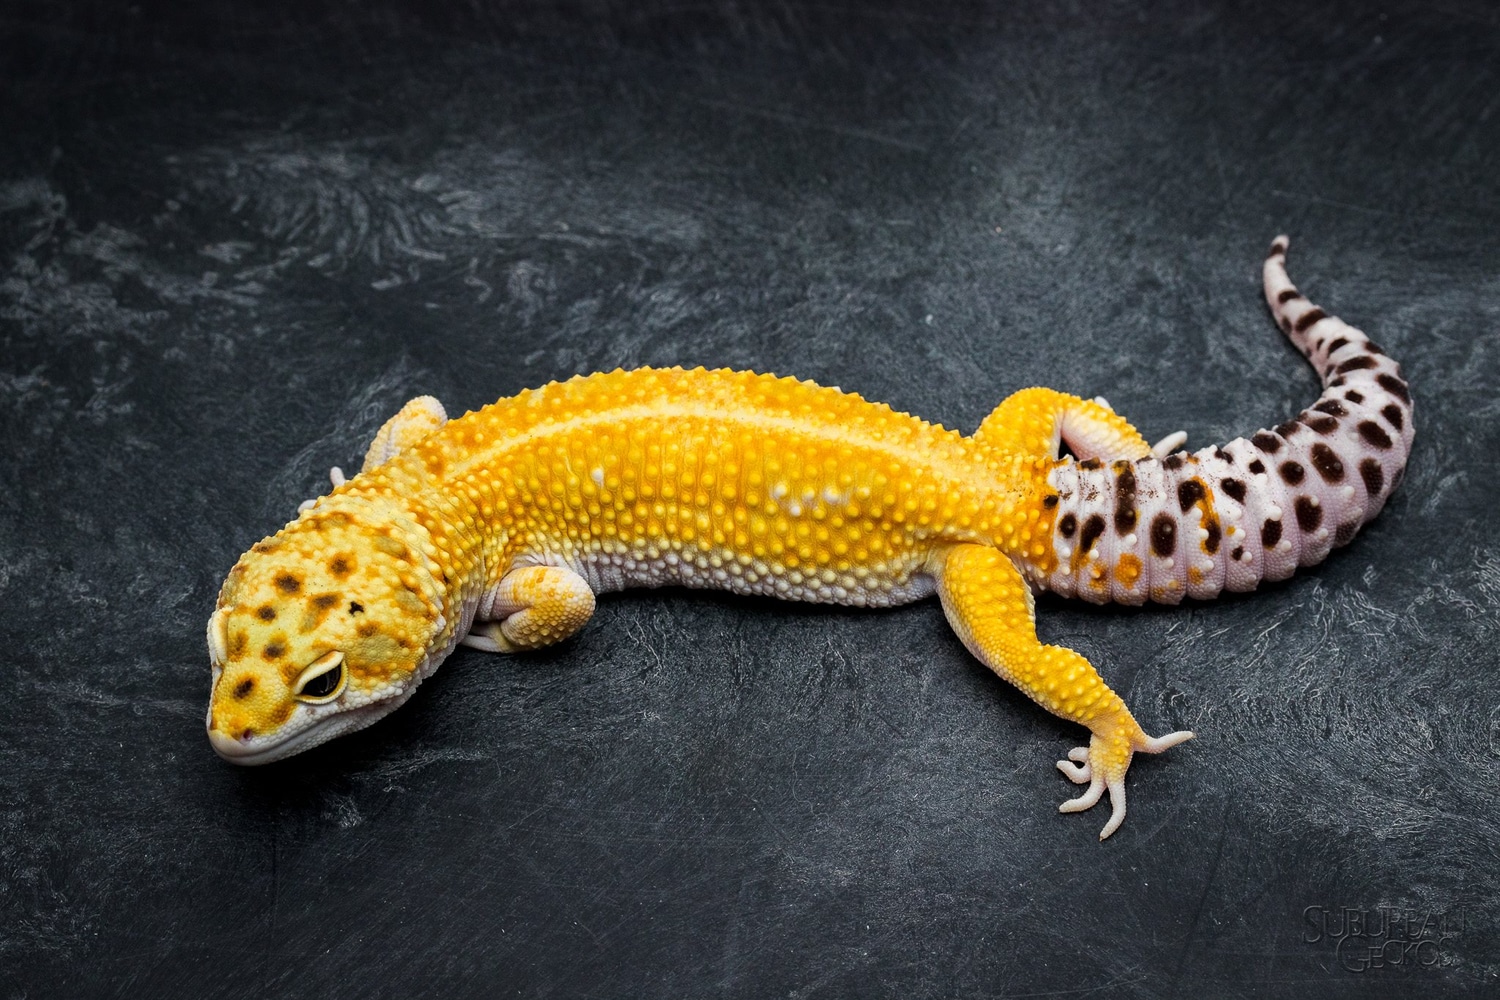 White And Yellow Hyper Xanthic Leopard Gecko by Suburban Geckos